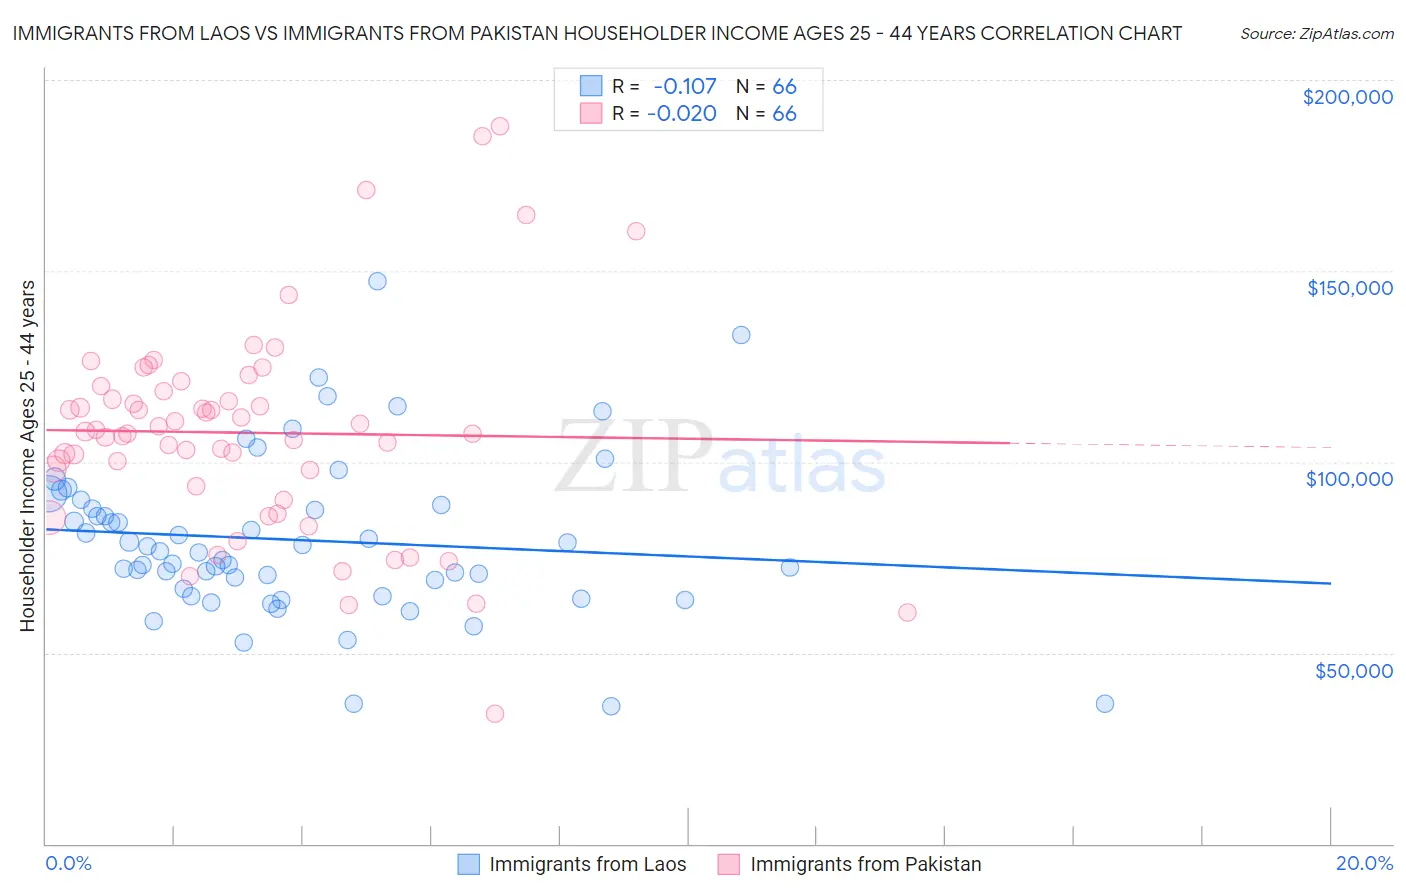 Immigrants from Laos vs Immigrants from Pakistan Householder Income Ages 25 - 44 years